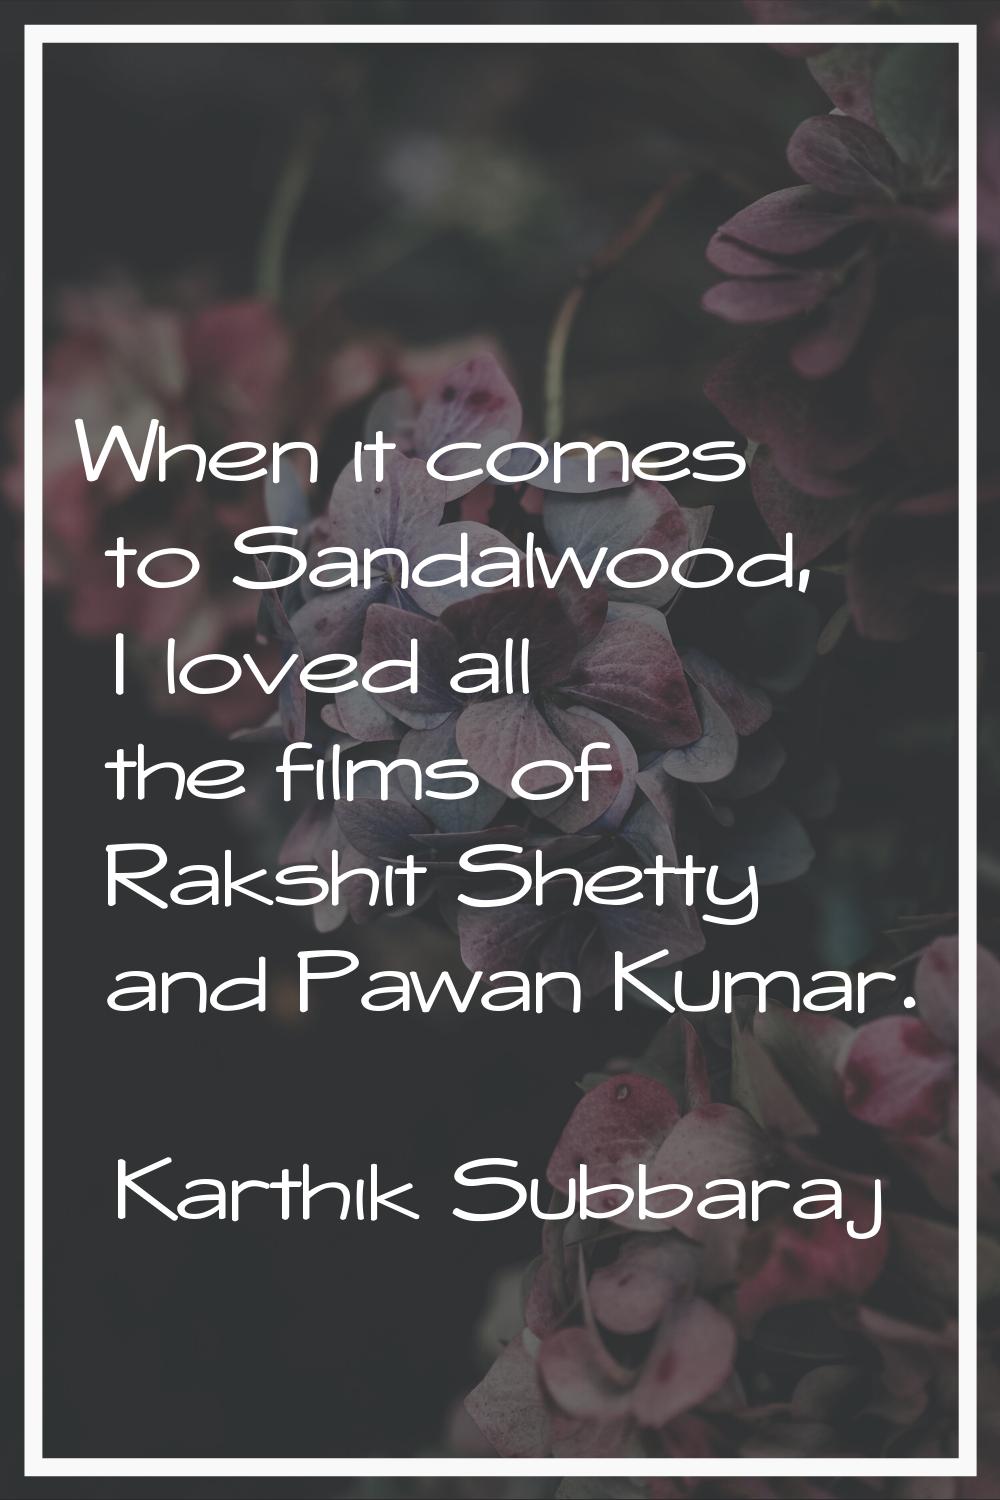 When it comes to Sandalwood, I loved all the films of Rakshit Shetty and Pawan Kumar.